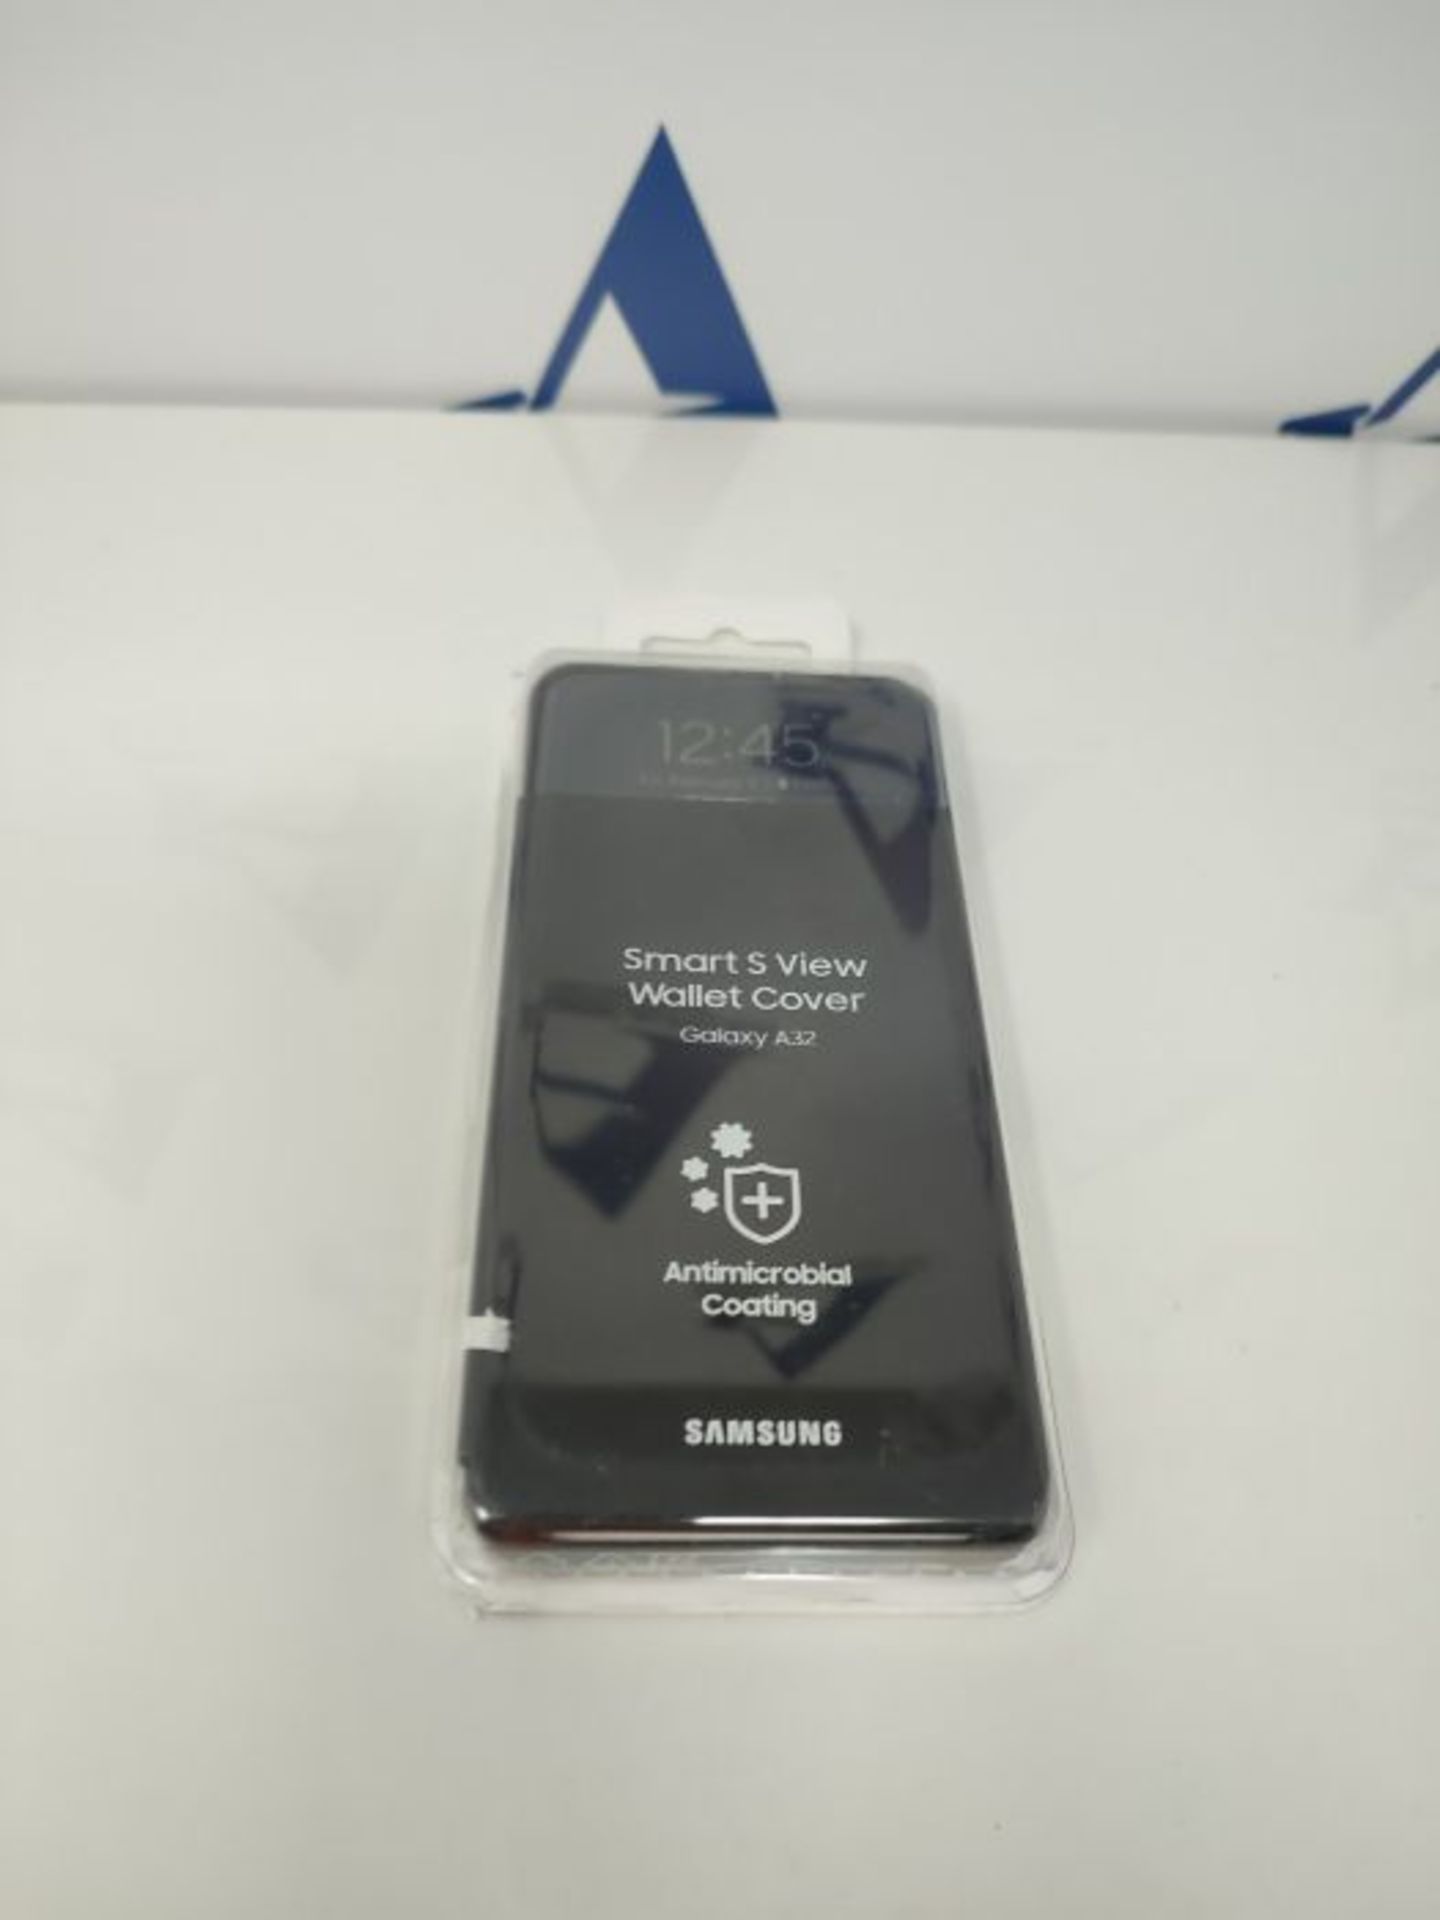 Samsung A32 LTE View Wallet Cover Black - Image 2 of 2